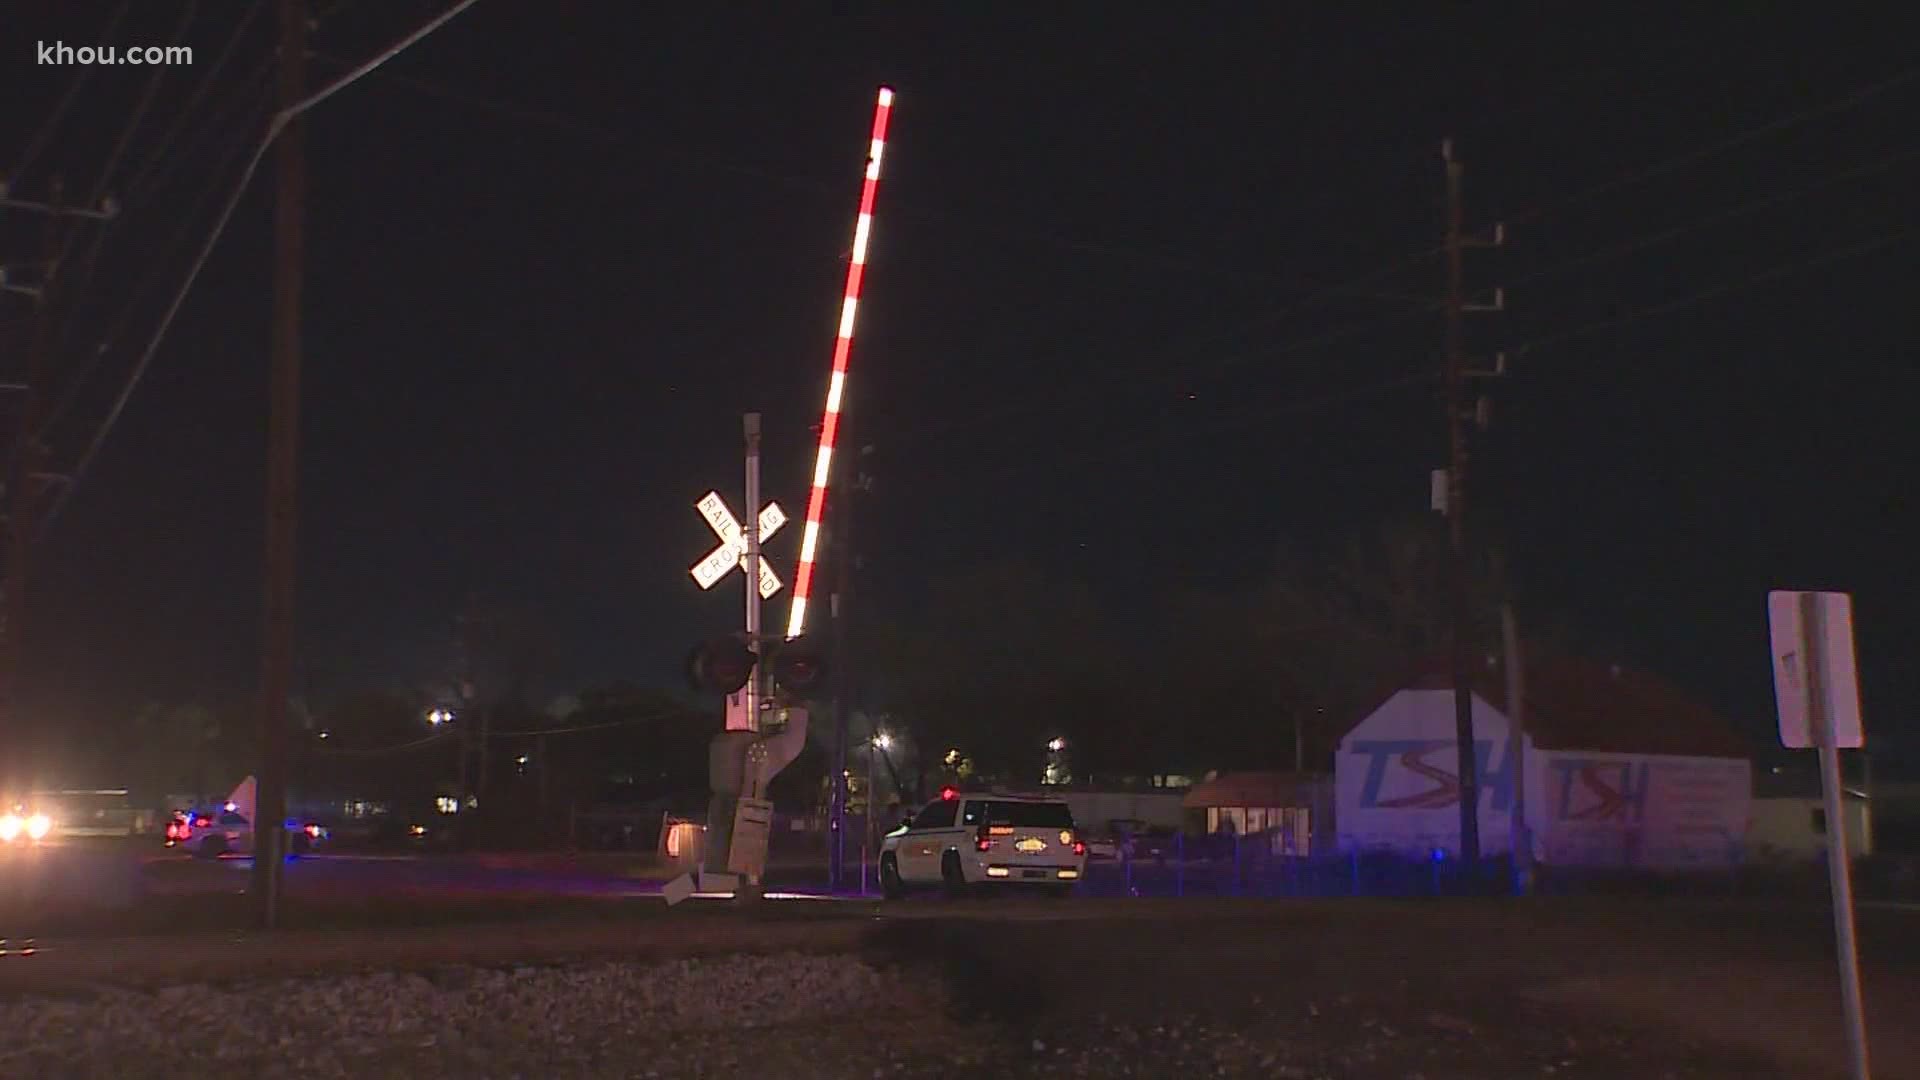 Sheriff Ed Gonzalez said the SUV went around two vehicles and through the railroad crossing arms in an attempt to get across the tracks before the train passed.